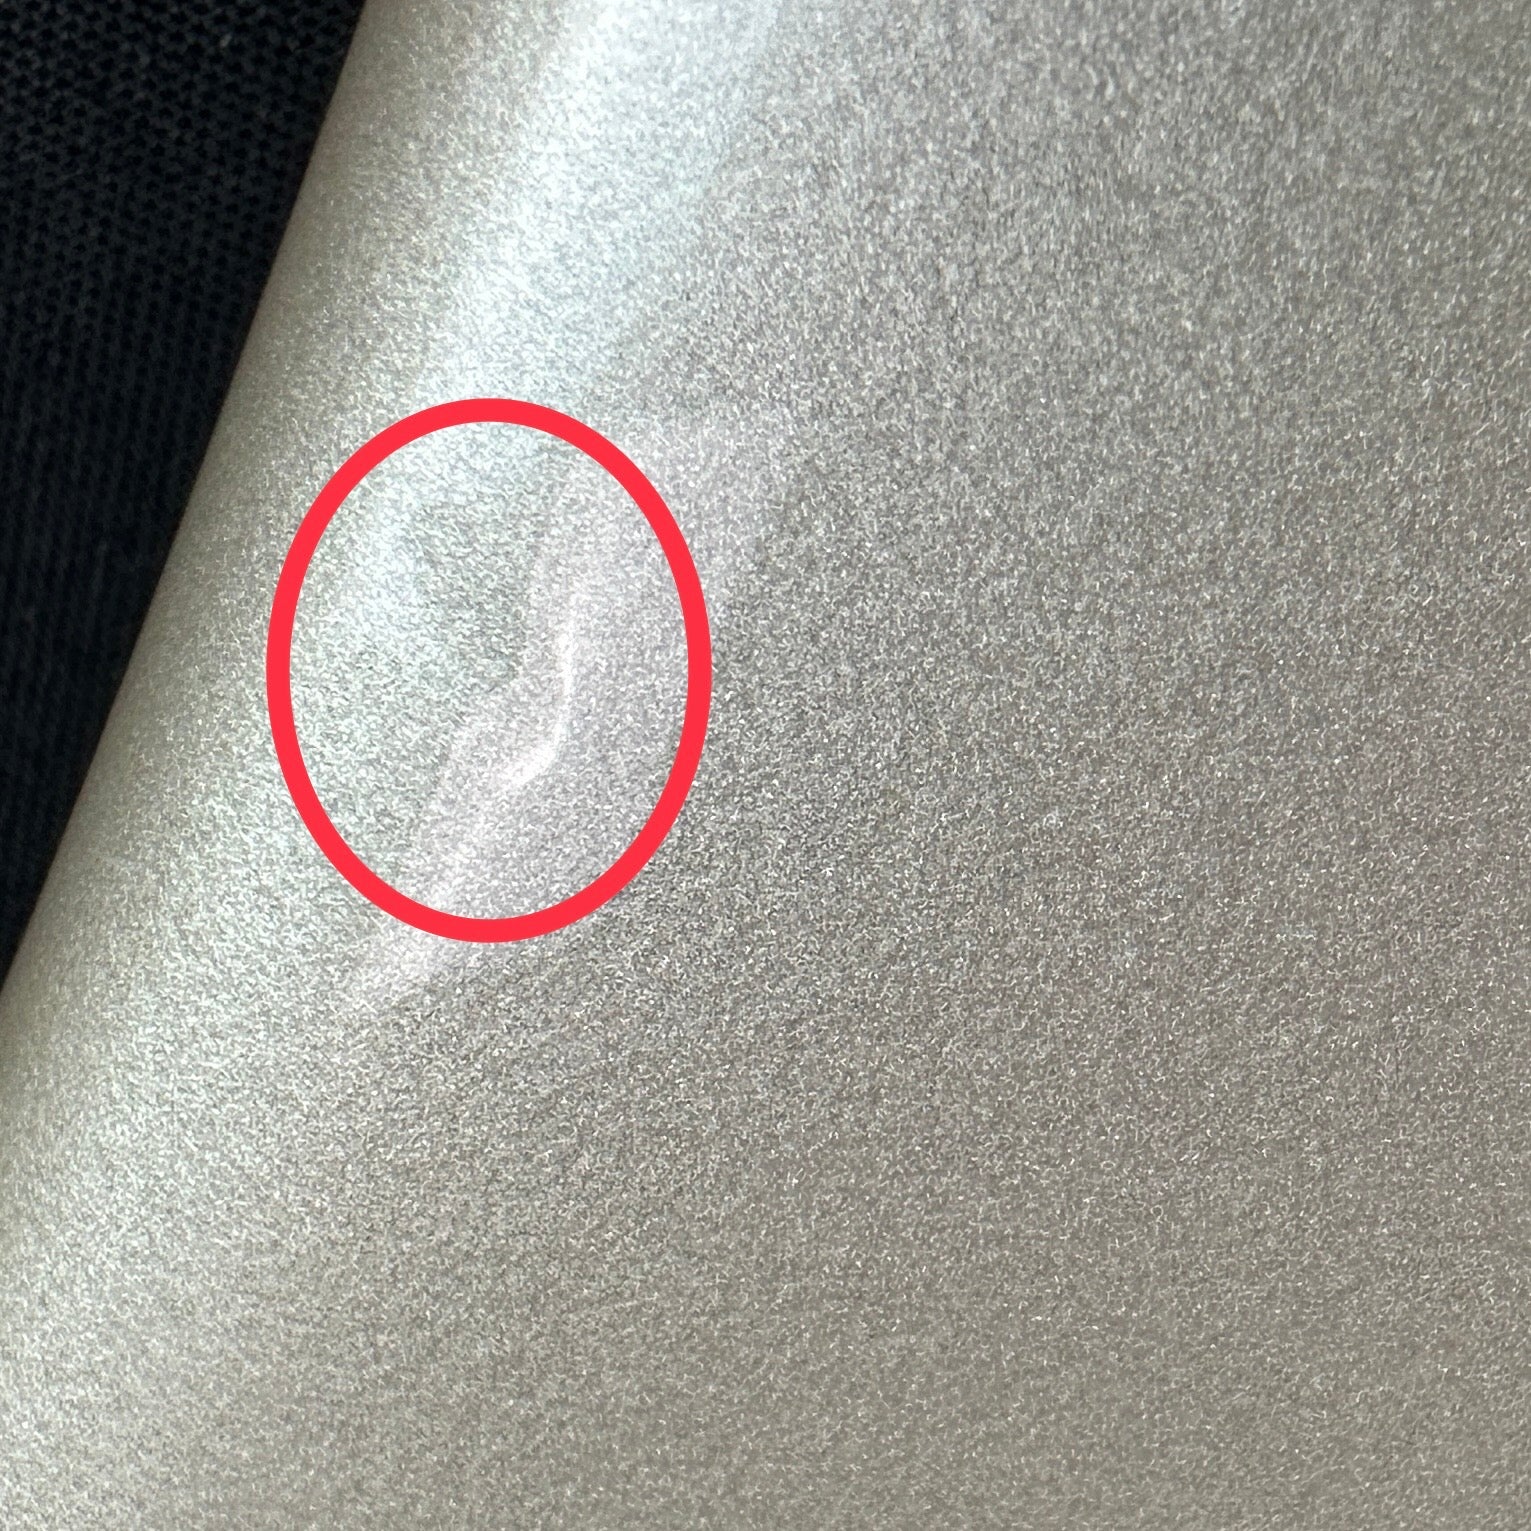 Small dent near edge on front of body.